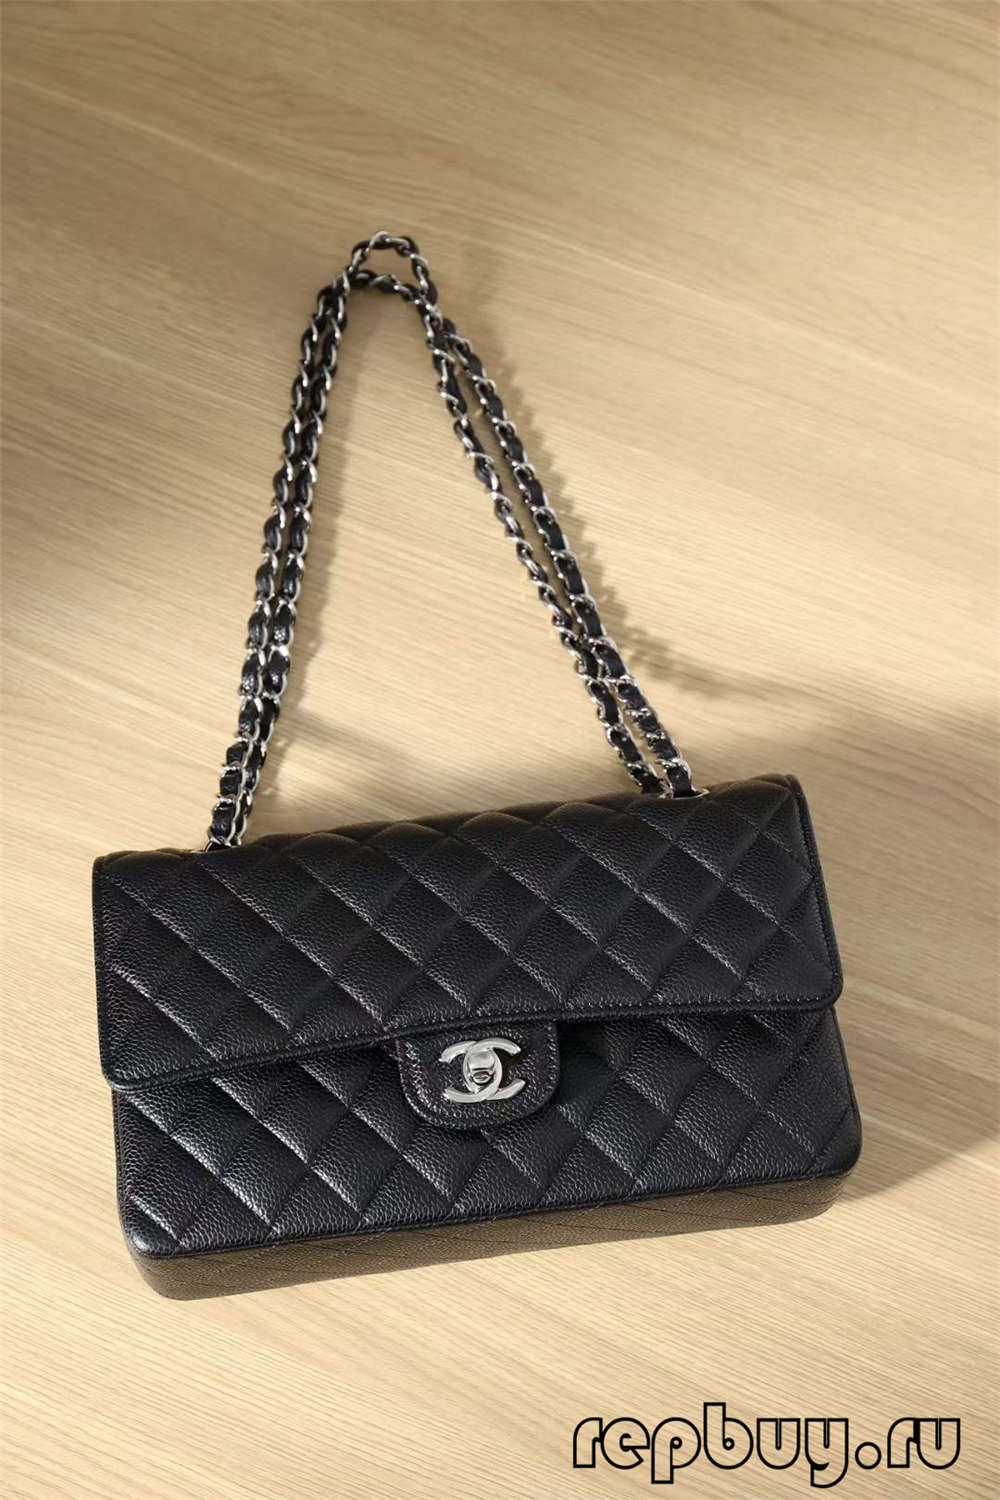 Best Fake Chanel Purse Made With REAL LEATHER!! Chanel Classic Flap Replica-Best Quality Fake Louis Vuitton Bag Online Store, Replica designer bag ru